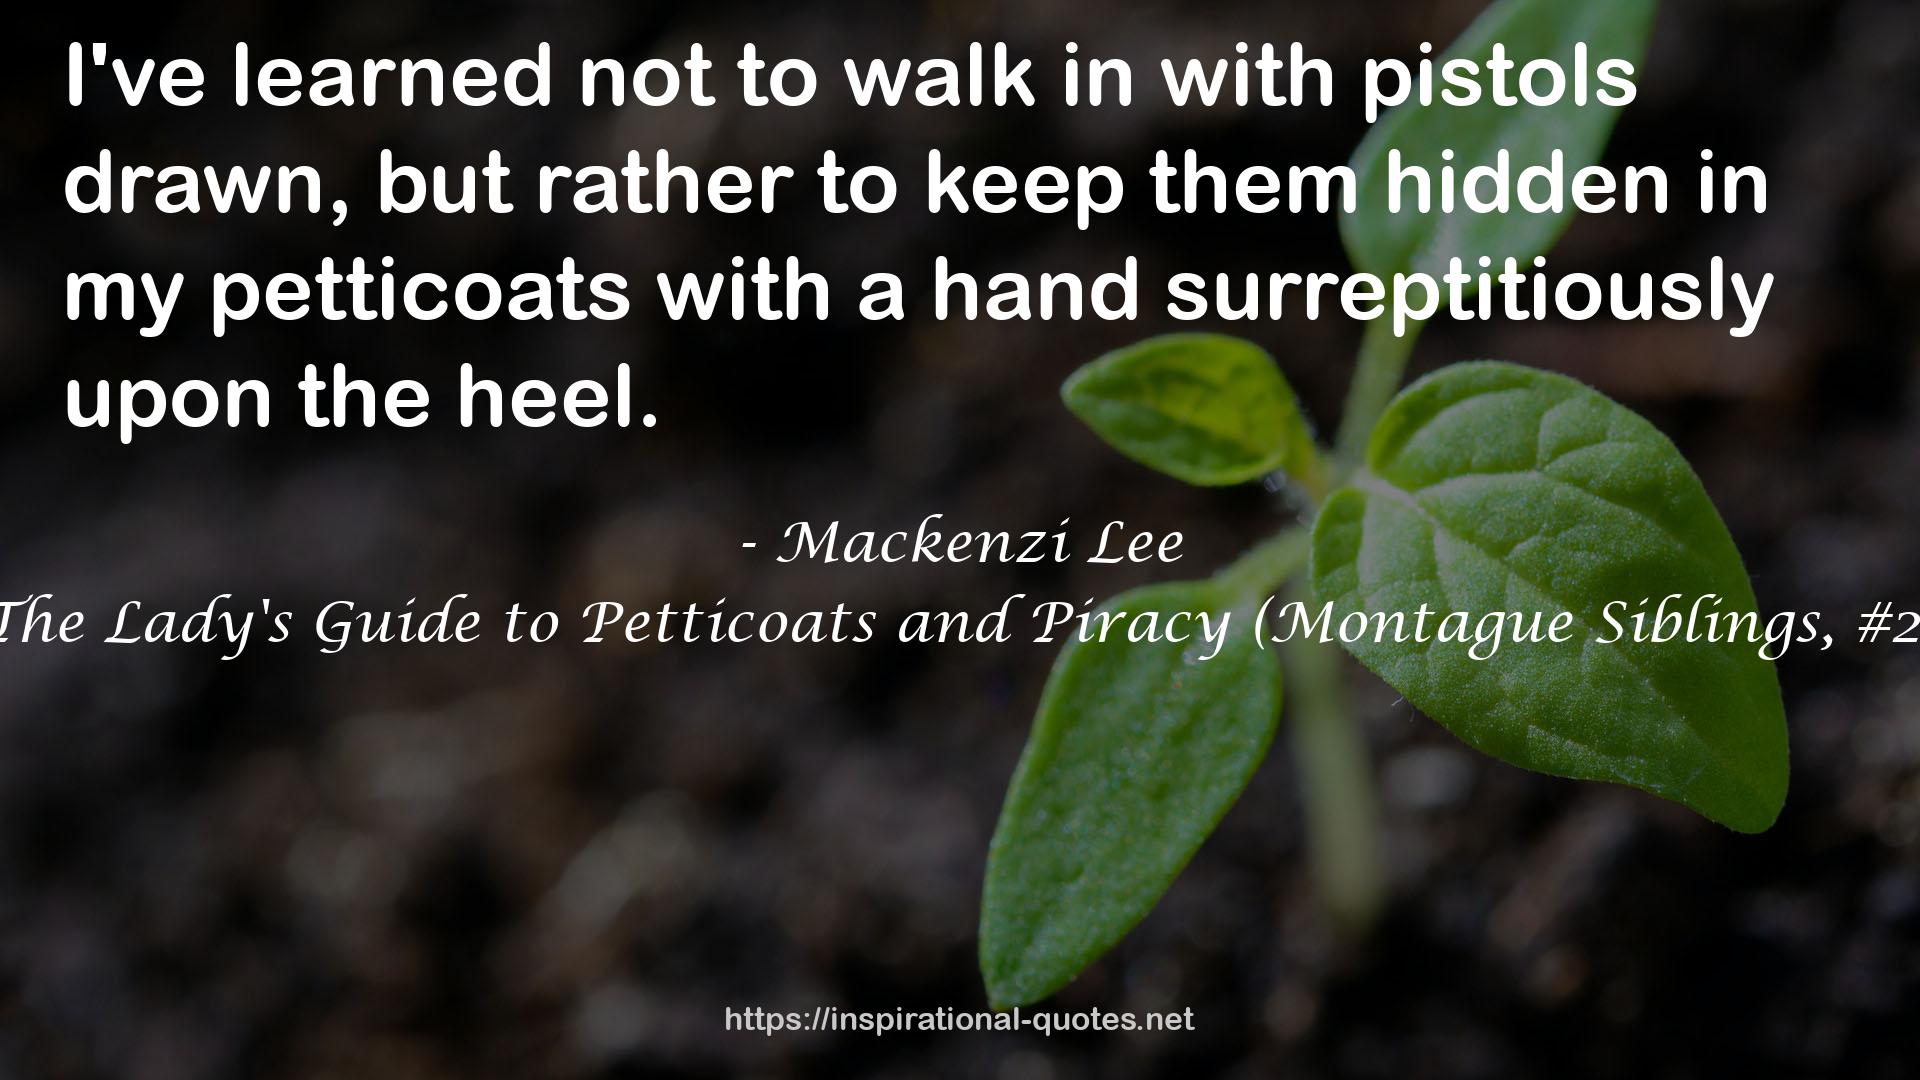 The Lady's Guide to Petticoats and Piracy (Montague Siblings, #2) QUOTES